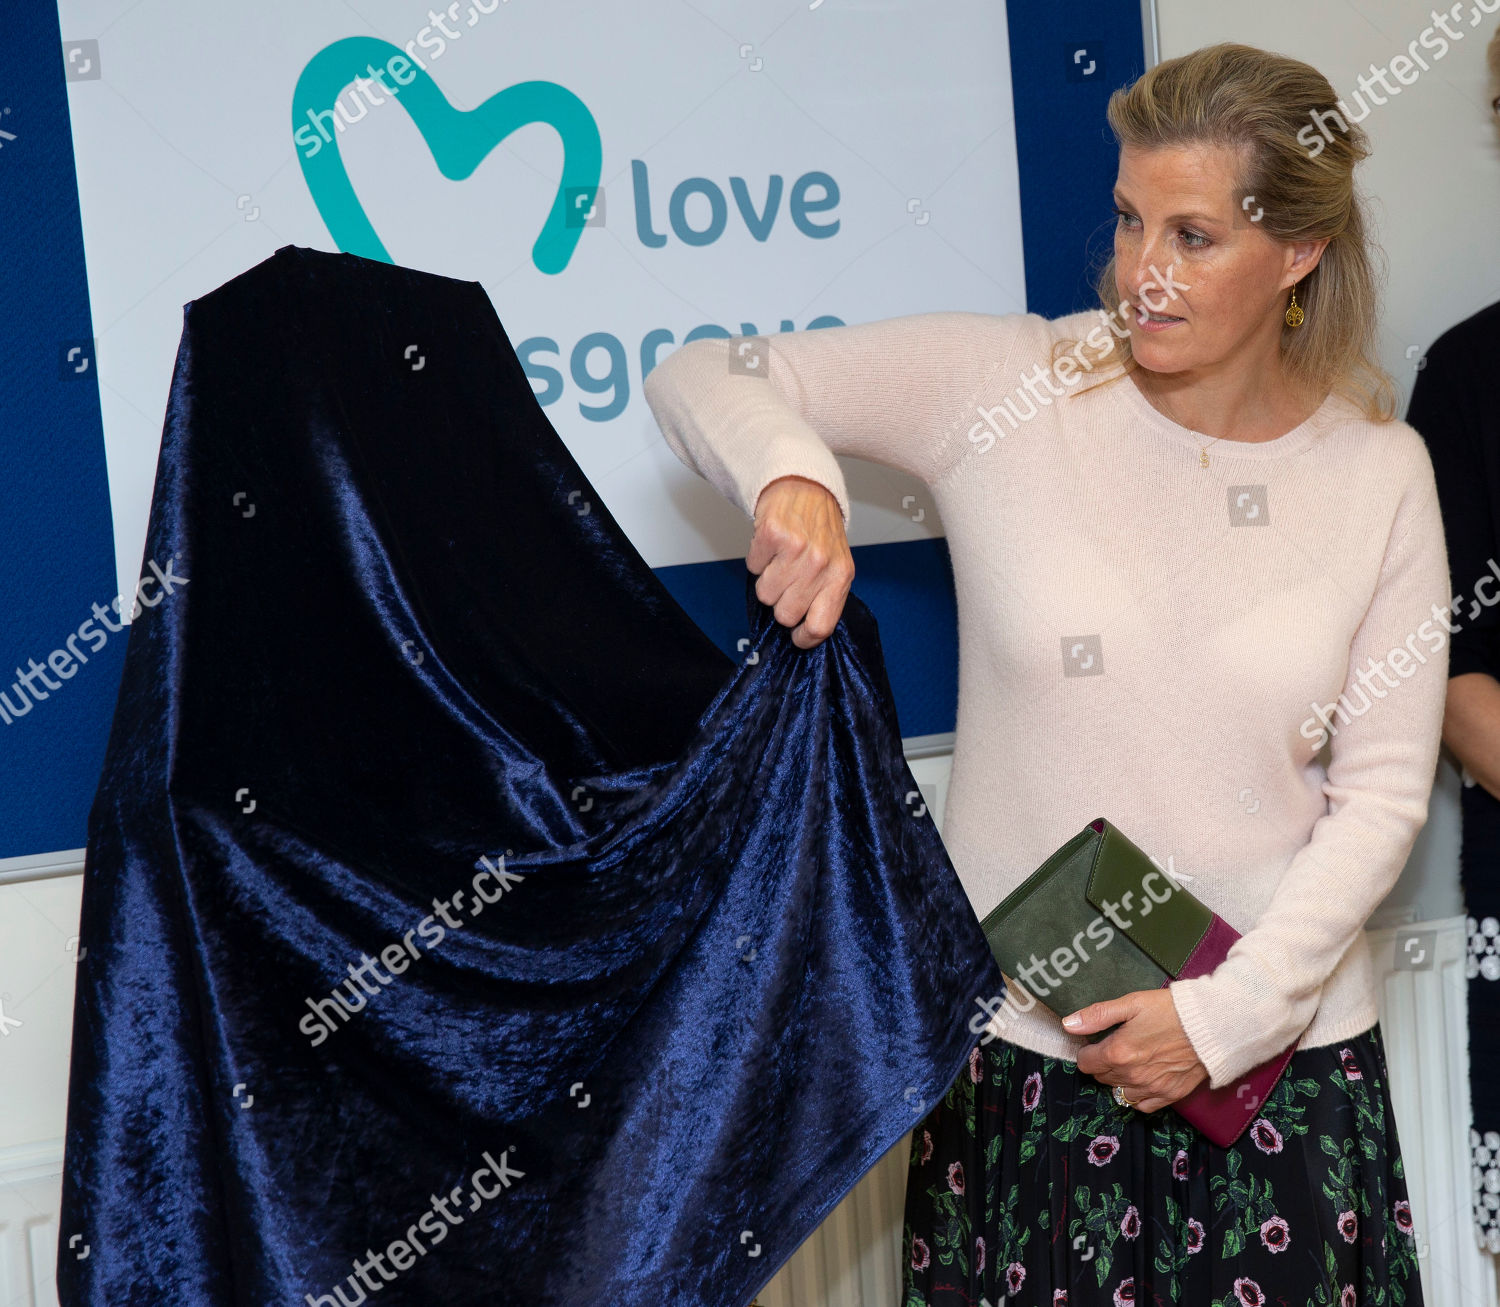 sophie-countess-of-wessex-visit-to-musgrove-park-hospital-taunton-somerset-uk-shutterstock-editorial-10422506t.jpg